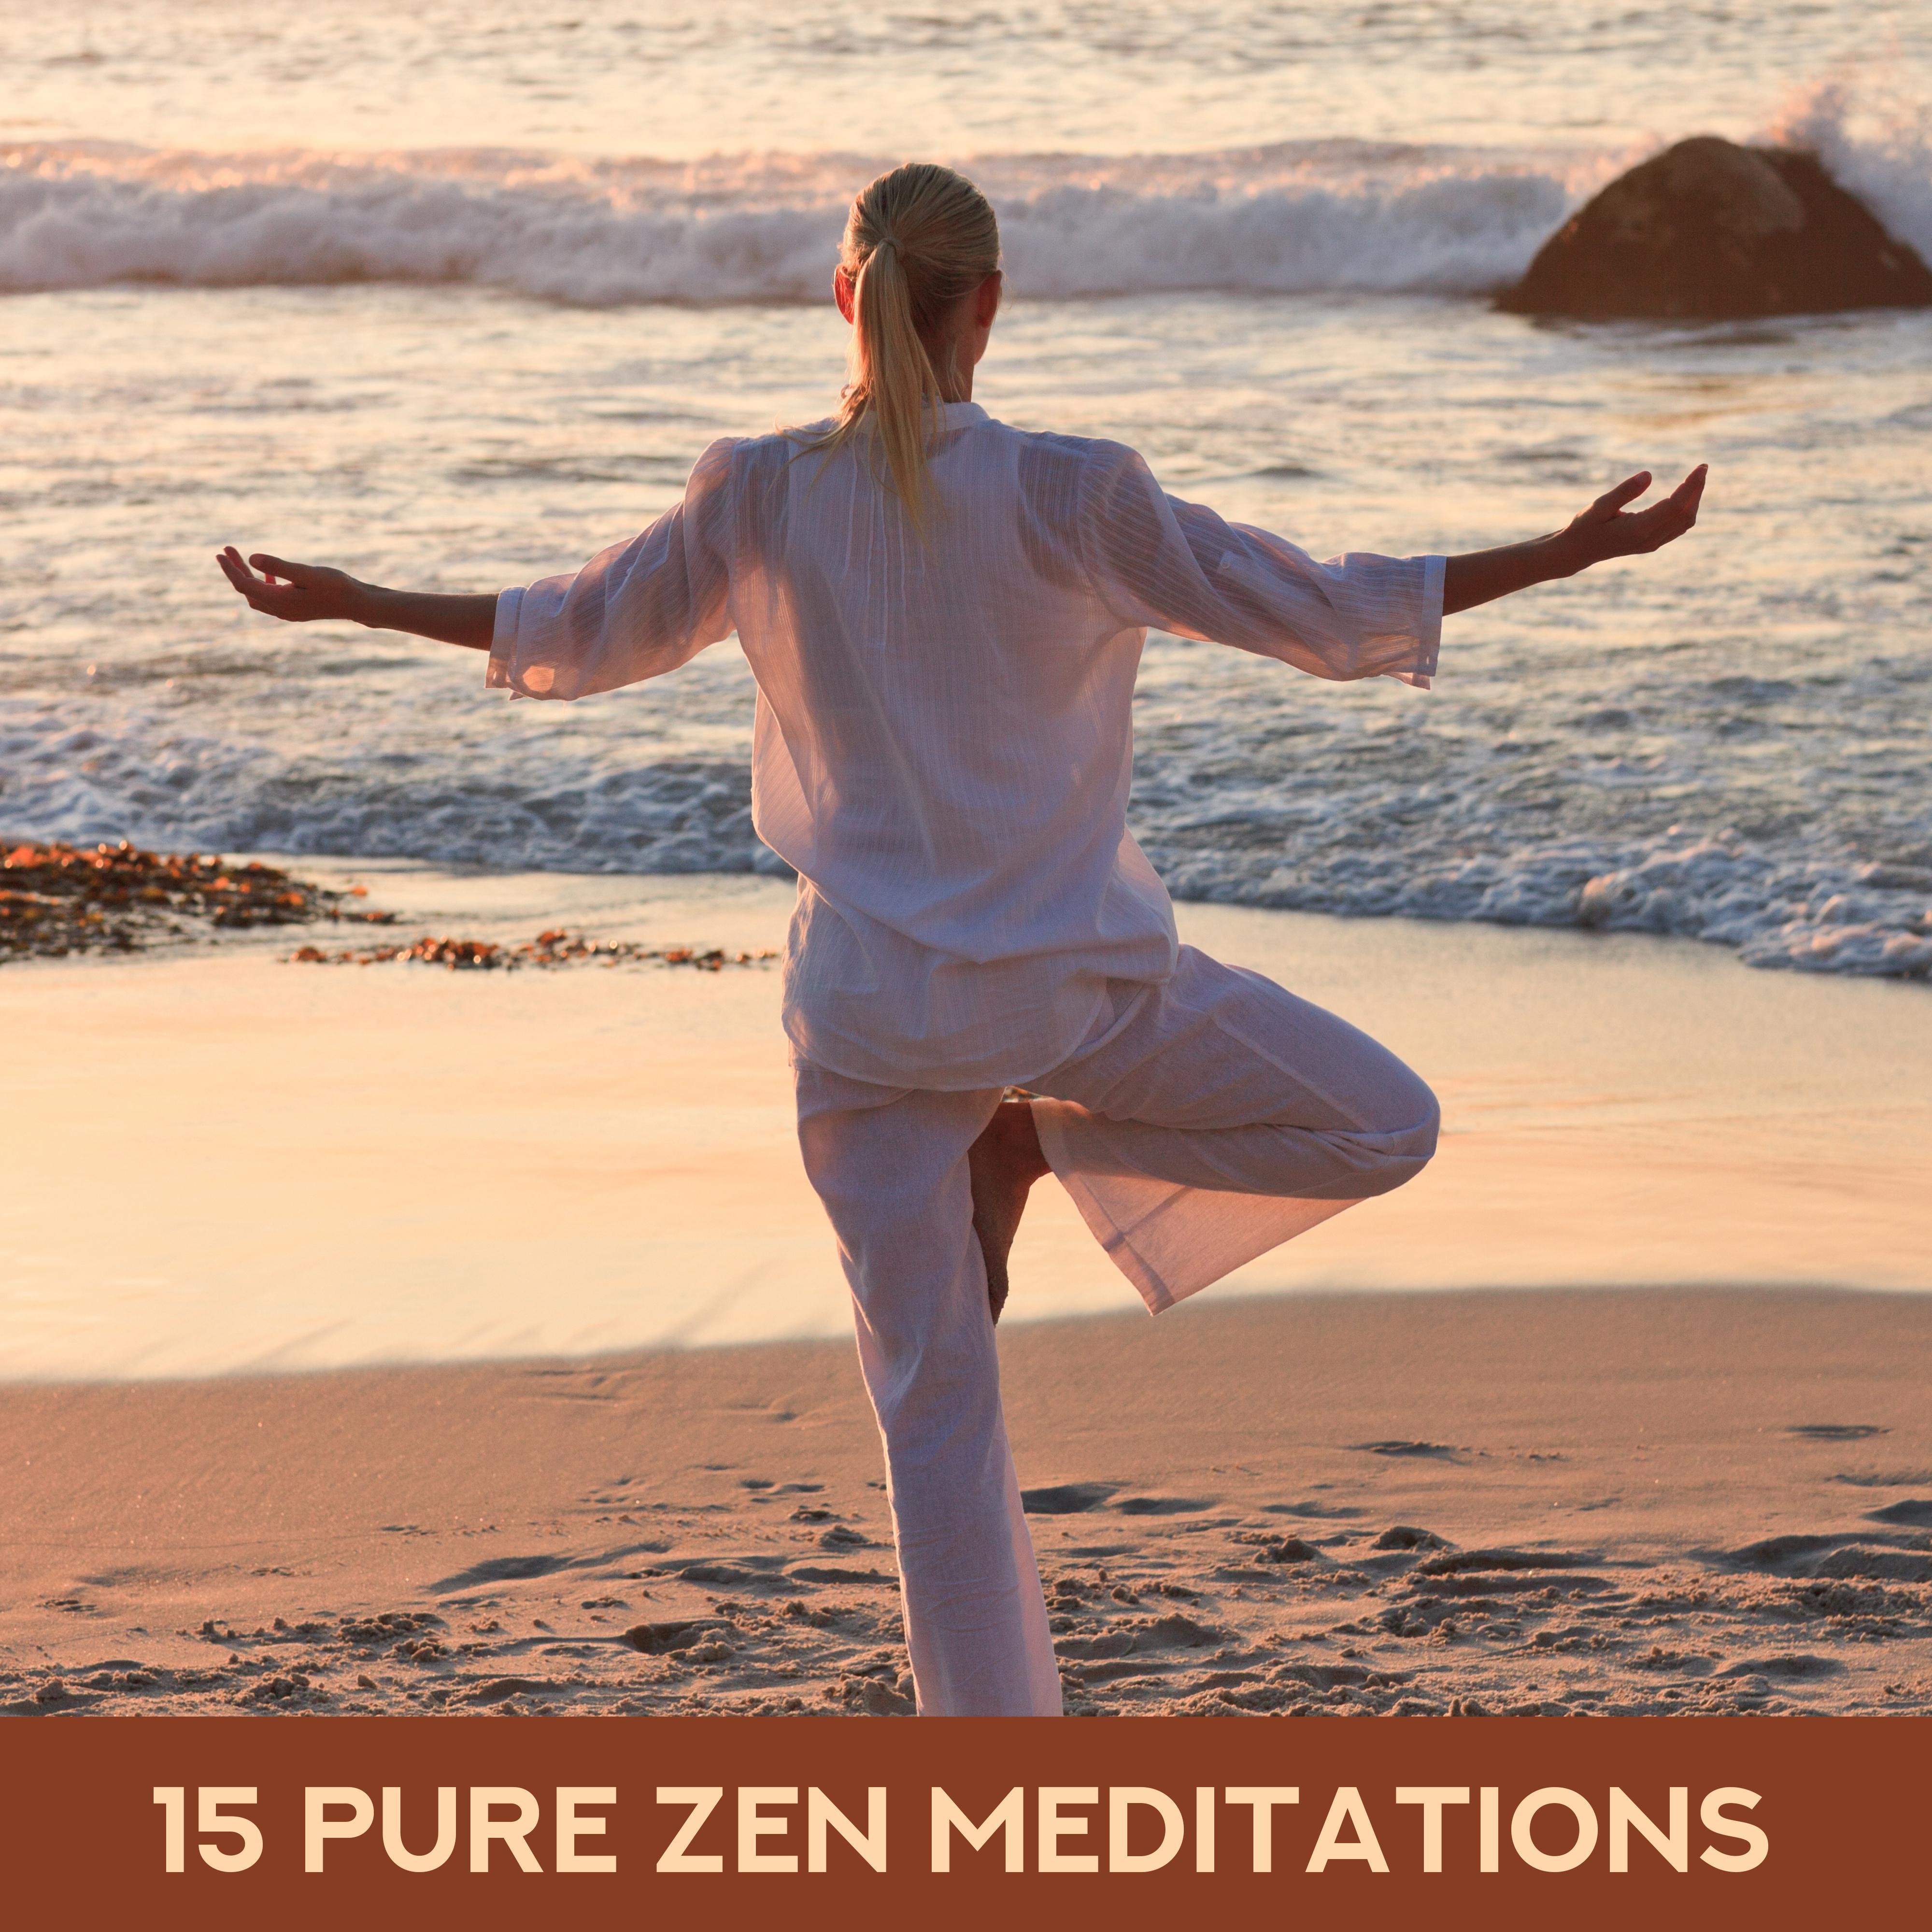 15 Pure Zen Meditations: 2019 New Age Music for Deep Yoga & Relaxation, Buddha Lounge, Mantra, Third Eye Open